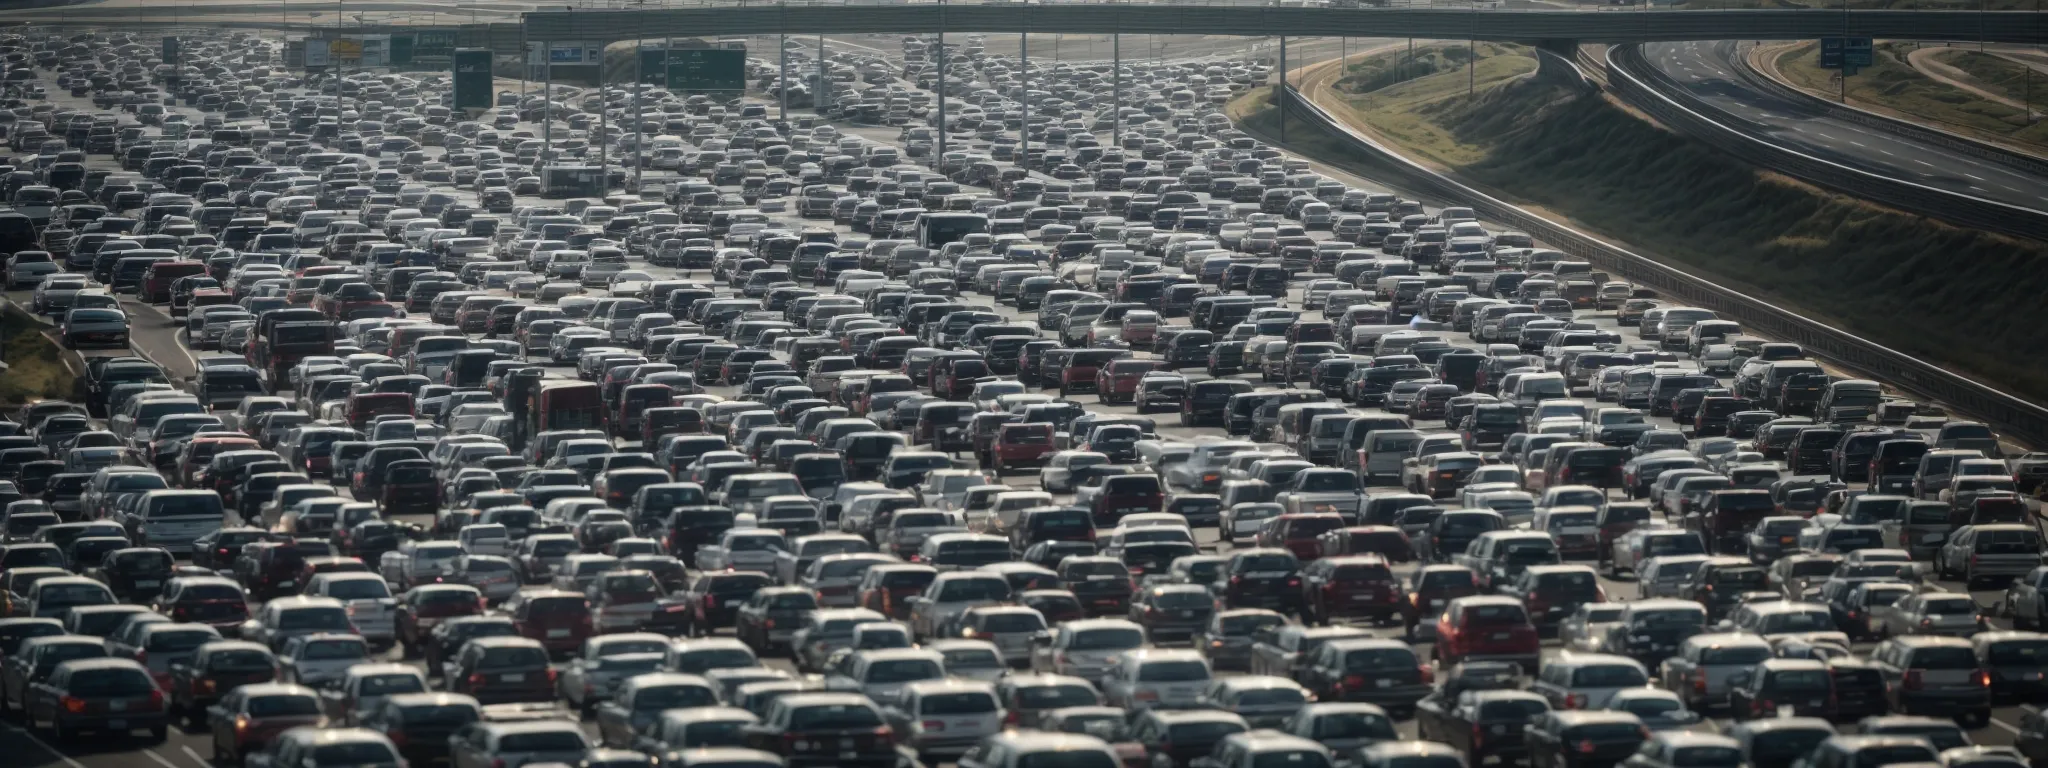 a highway filled with cars symbolizing the flow of web traffic navigated by seo and content marketing strategies.